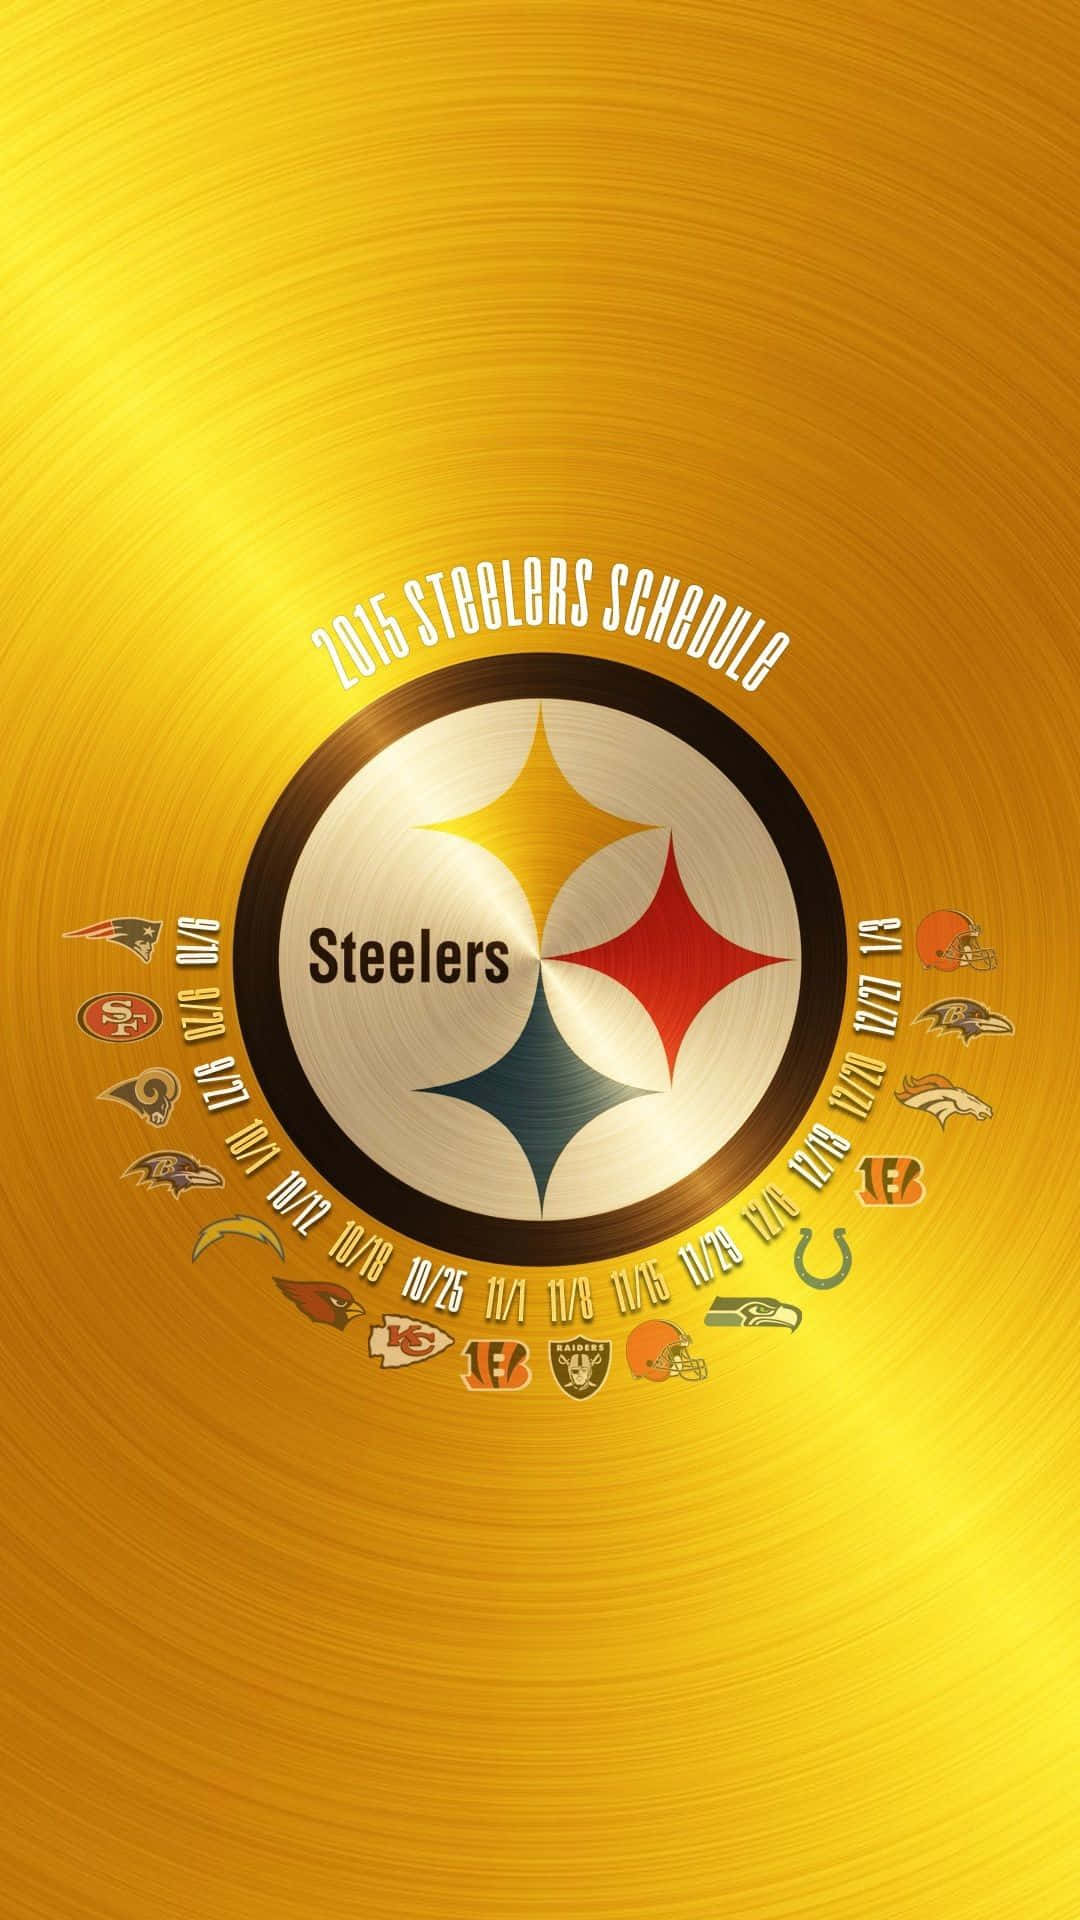 Keep Up to Date with the Latest News About the Steelers Wallpaper